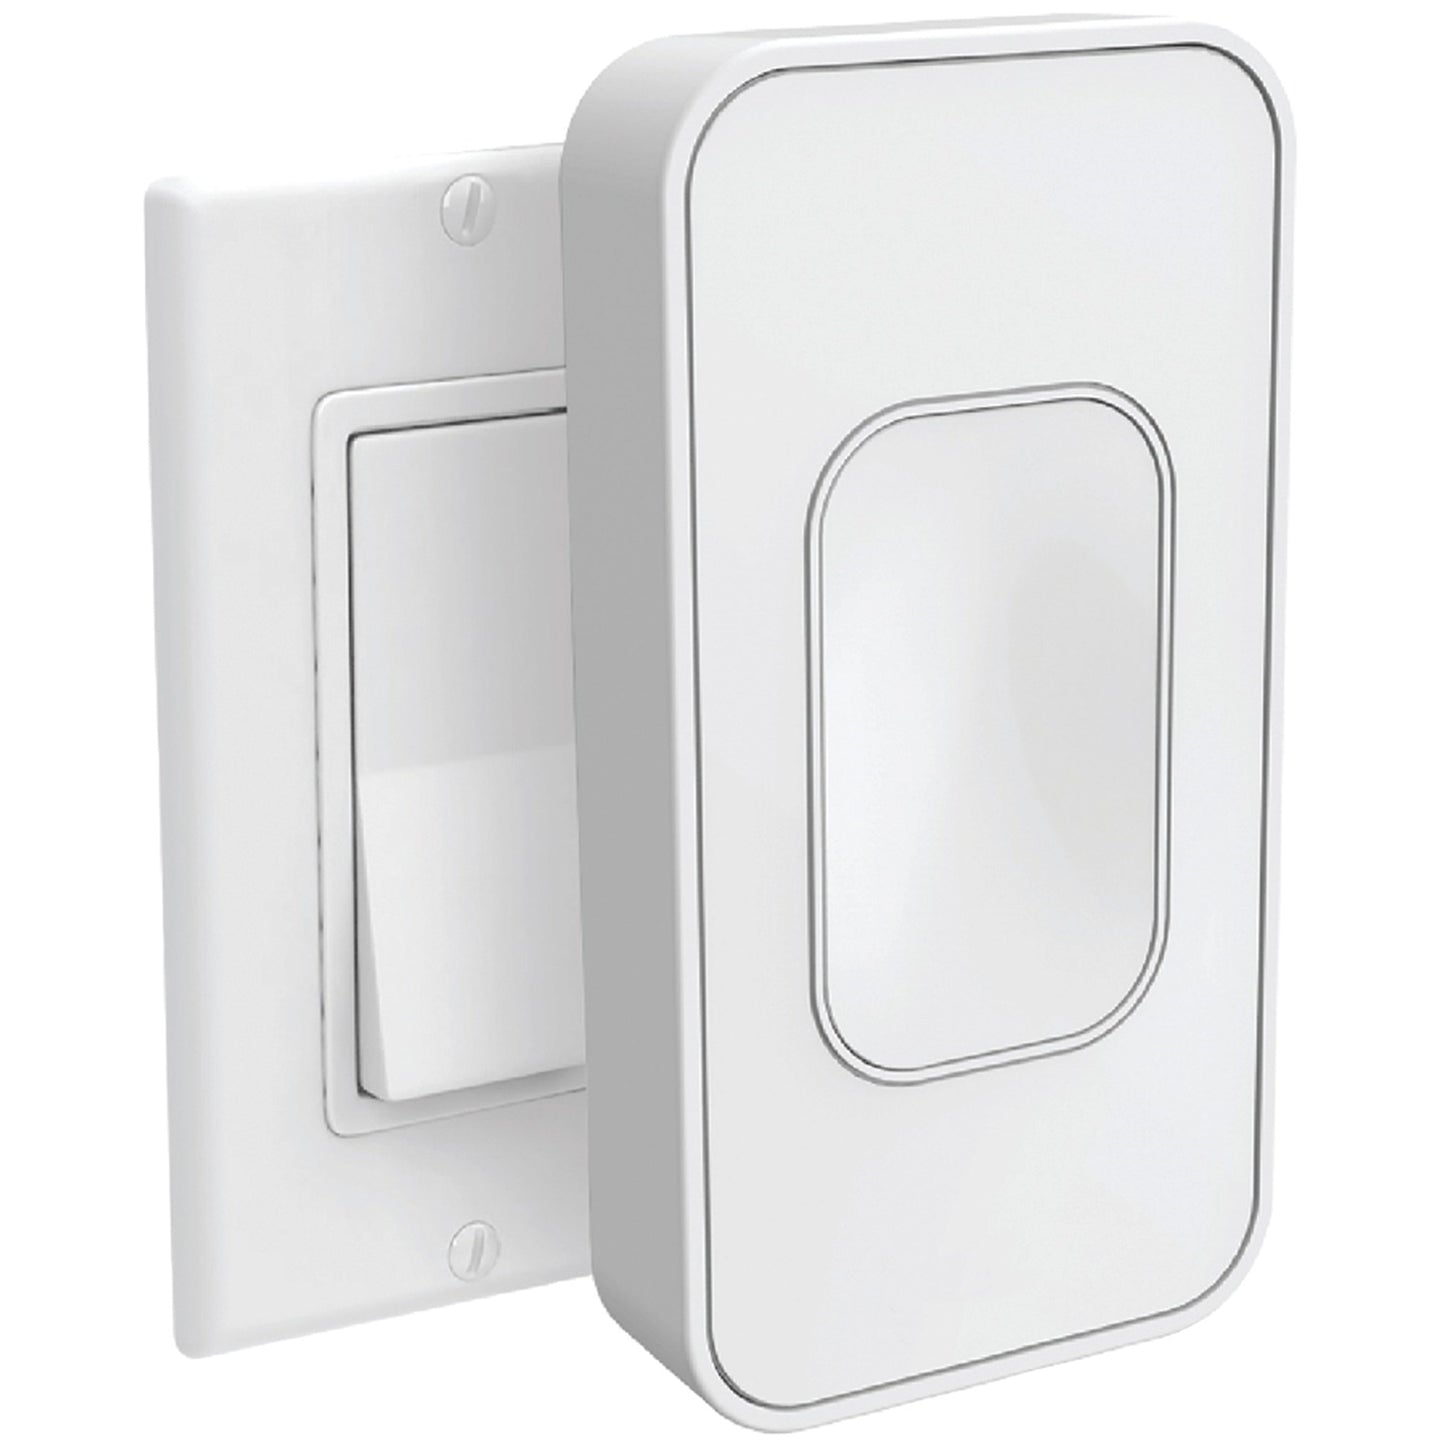 Switchmate (1) Dual Smart Power Outlet & (1) Smart Light Switch 2.0 for Rocker Style Light Switches - Warehouse B